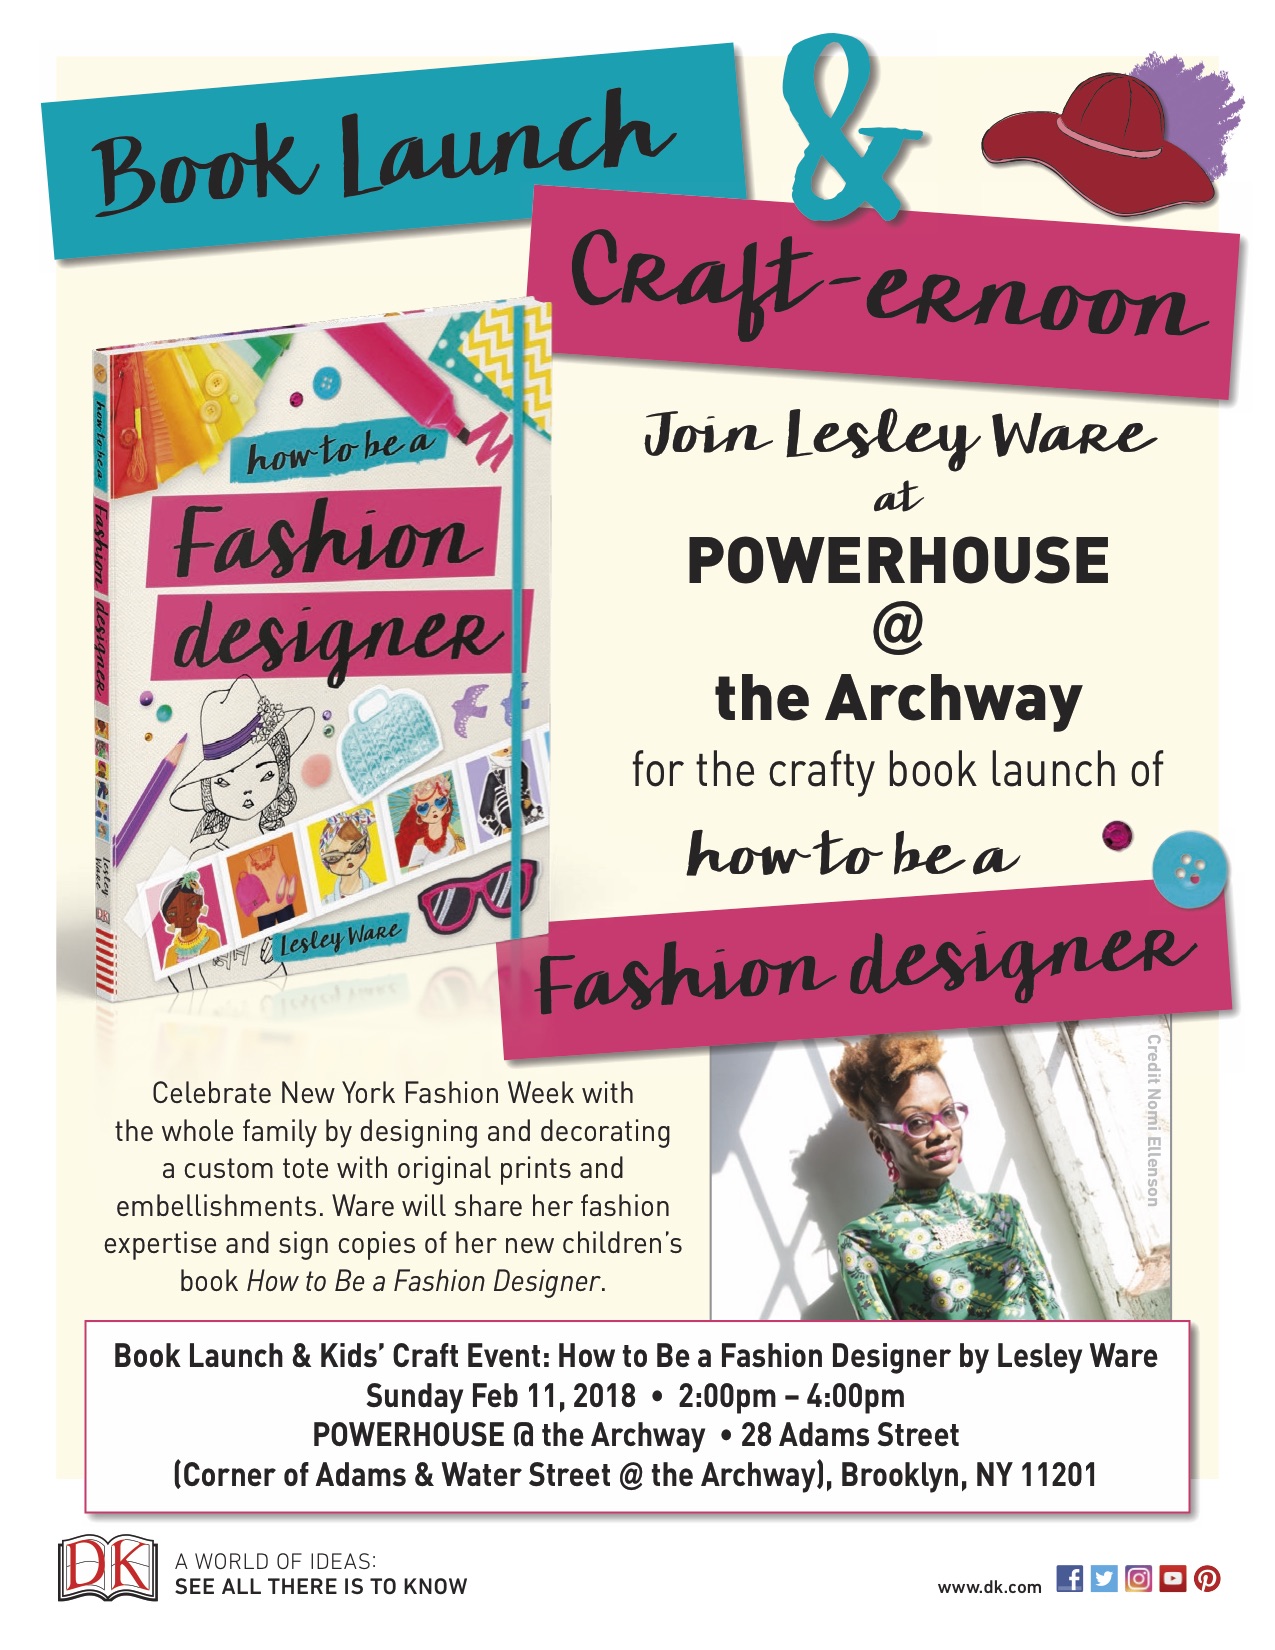 Book Launch & Kids' Craft Event: How to Be a Fashion Designer by Lesley Ware